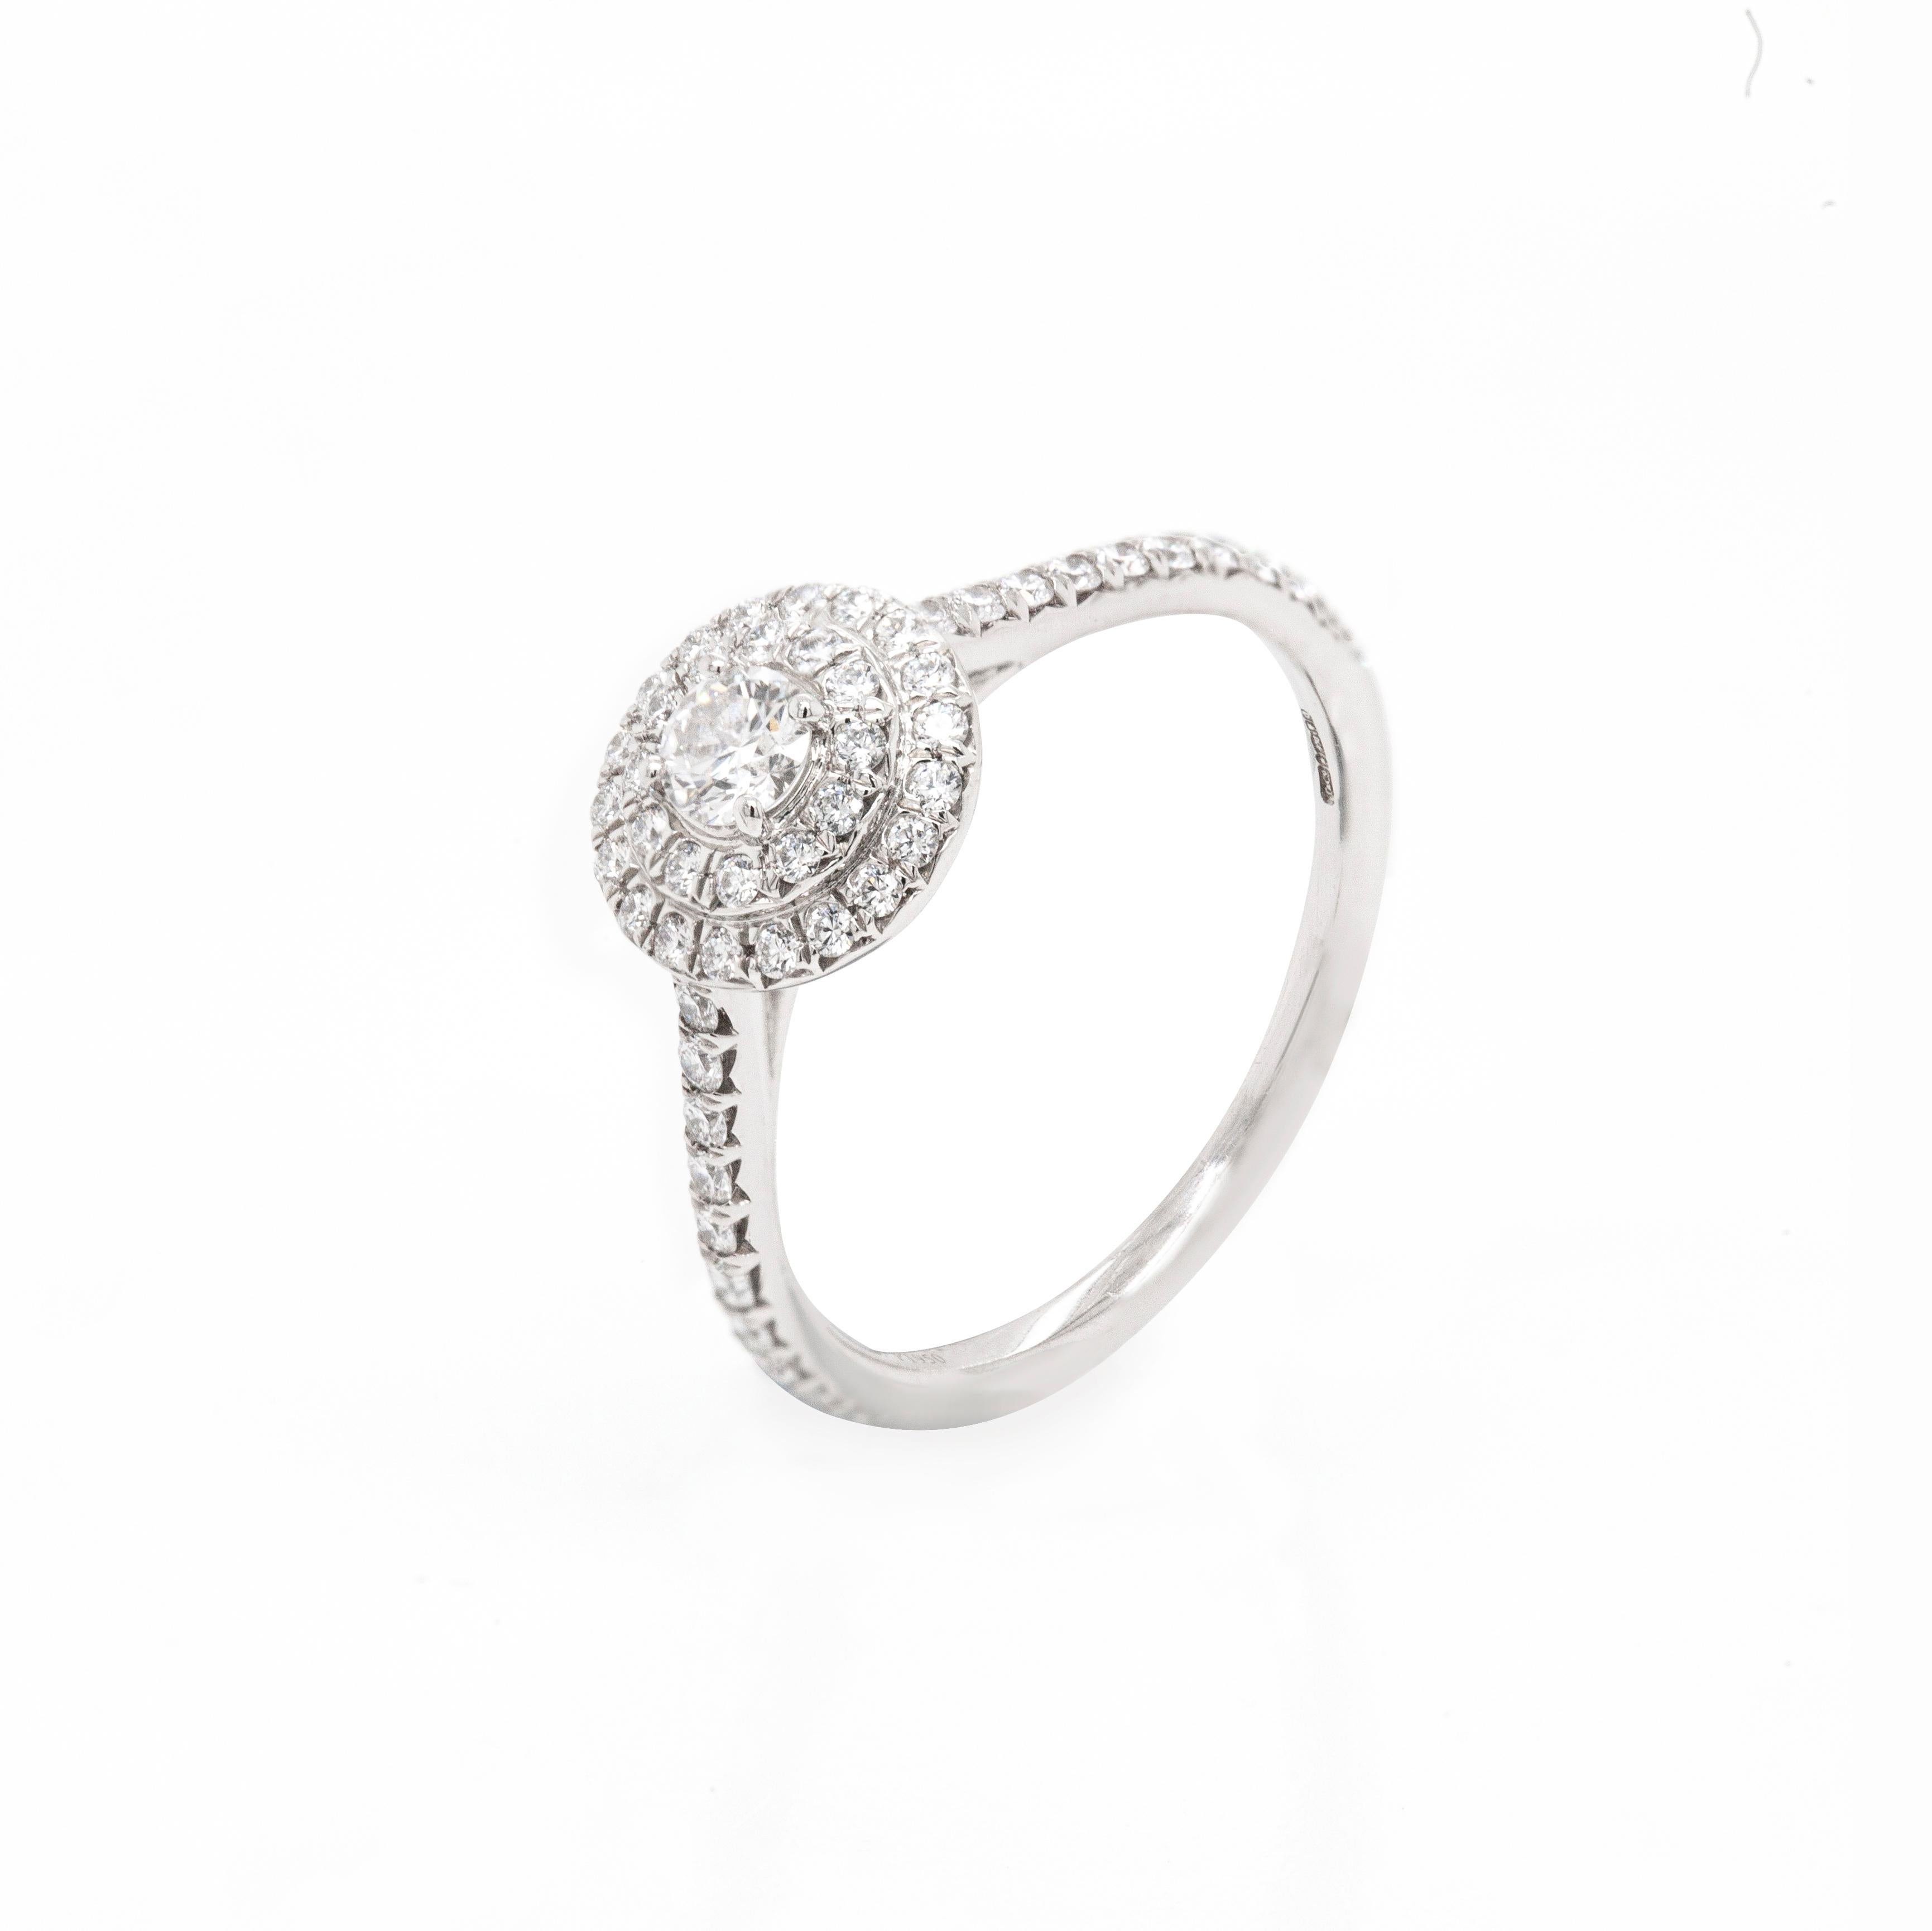 This wonderful engagement ring by the famous luxury house, Tiffany & Co. from their iconic 'Soleste' Collection is masterfully crafted from platinum. A beautiful 0.15ct round brilliant cut diamond mounted in a four claw, open back setting,